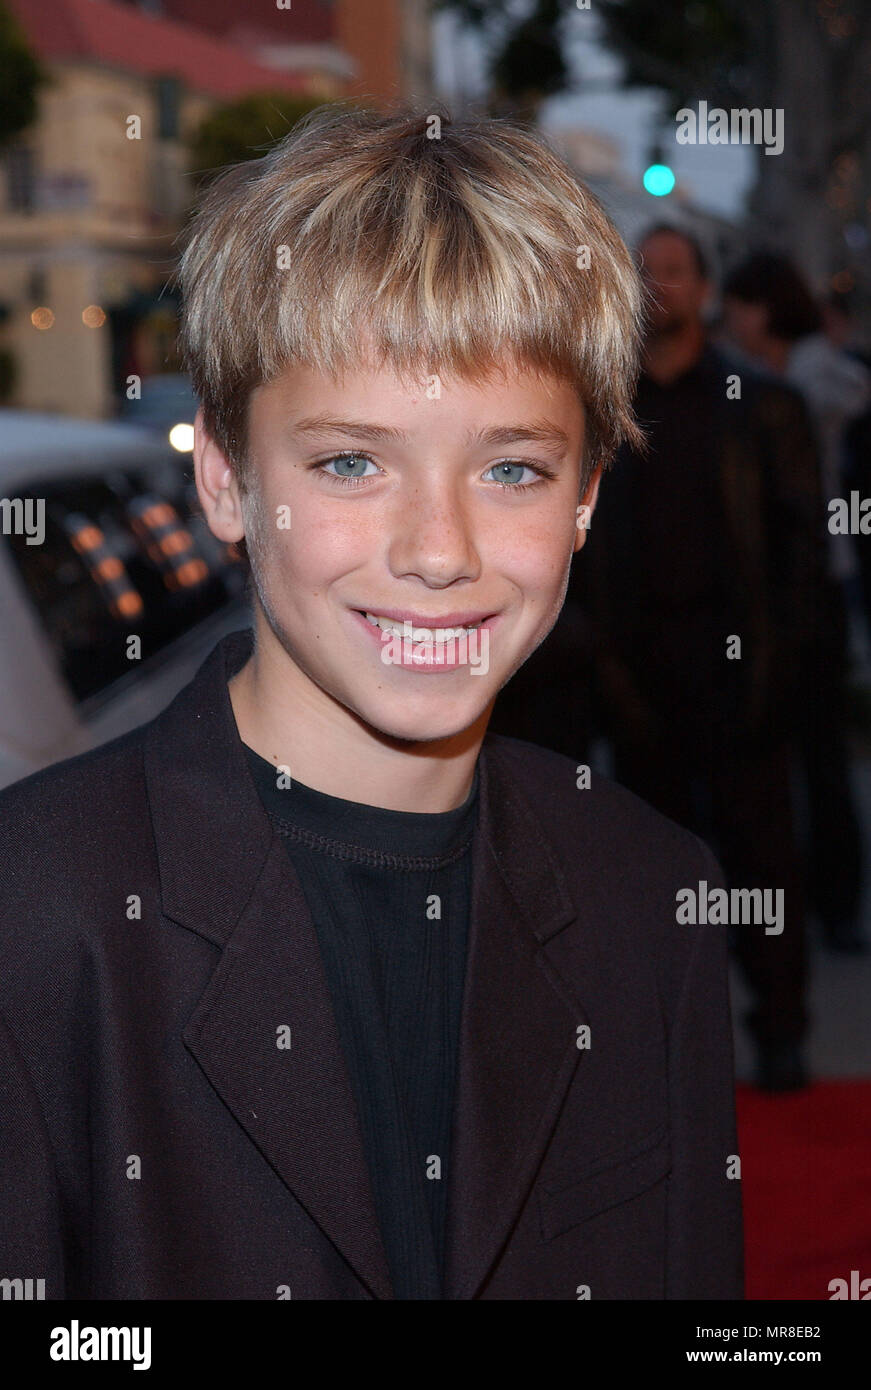 Jeremy Sumpter arriving at the premiere of FRAILTY at the Lemmle Theatre in Los Angeles. April 9, 2002. SumpterJeremy30 Red Carpet Event, Vertical, USA, Film Industry, Celebrities,  Photography, Bestof, Arts Culture and Entertainment, Topix Celebrities fashion /  Vertical, Best of, Event in Hollywood Life - California,  Red Carpet and backstage, USA, Film Industry, Celebrities,  movie celebrities, TV celebrities, Music celebrities, Photography, Bestof, Arts Culture and Entertainment,  Topix, headshot, vertical, one person,, from the year , 2002, inquiry tsuni@Gamma-USA.com Stock Photo